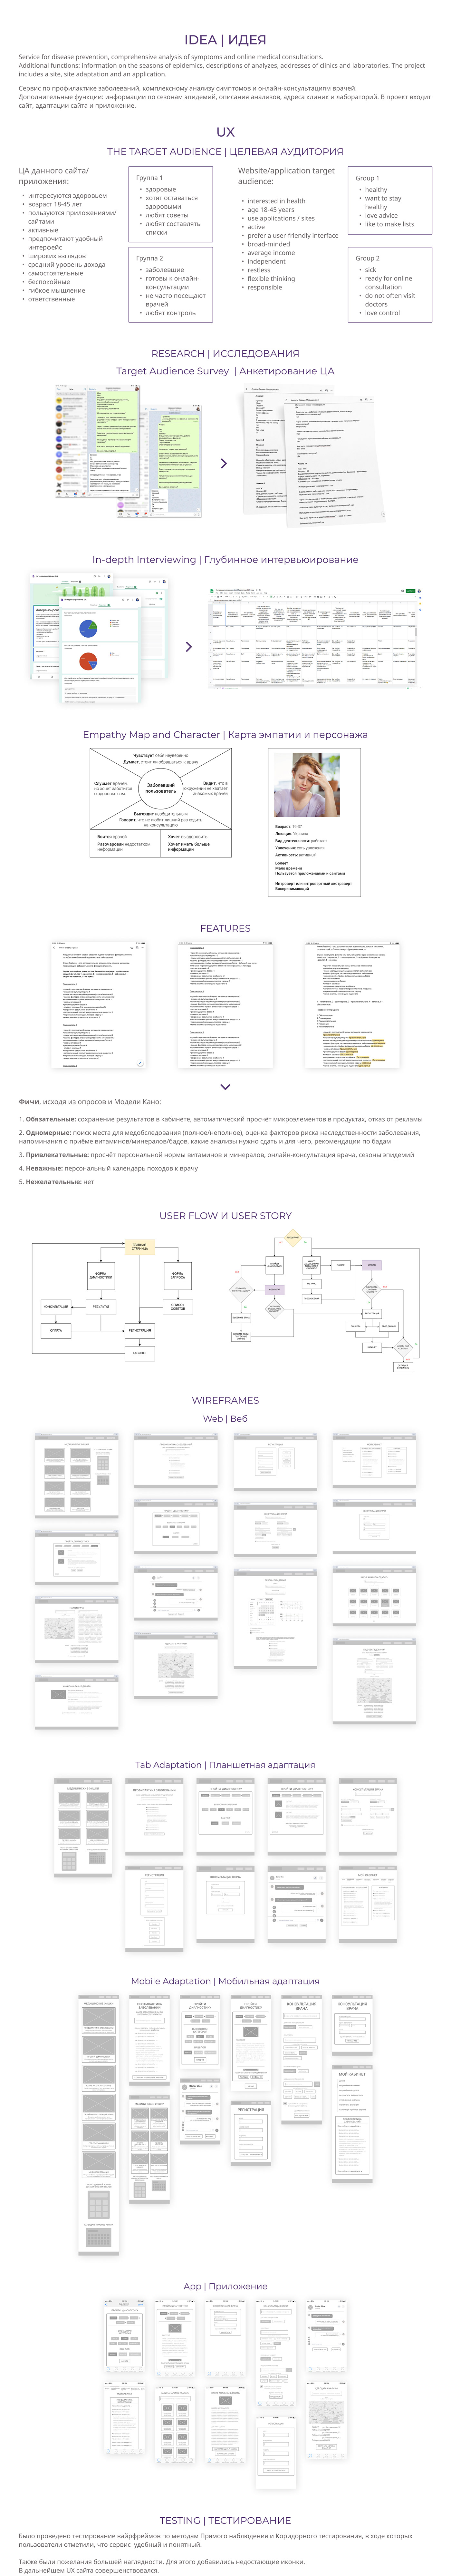 design features healthy medicine reasearch testing user flow ux UX design wireframe